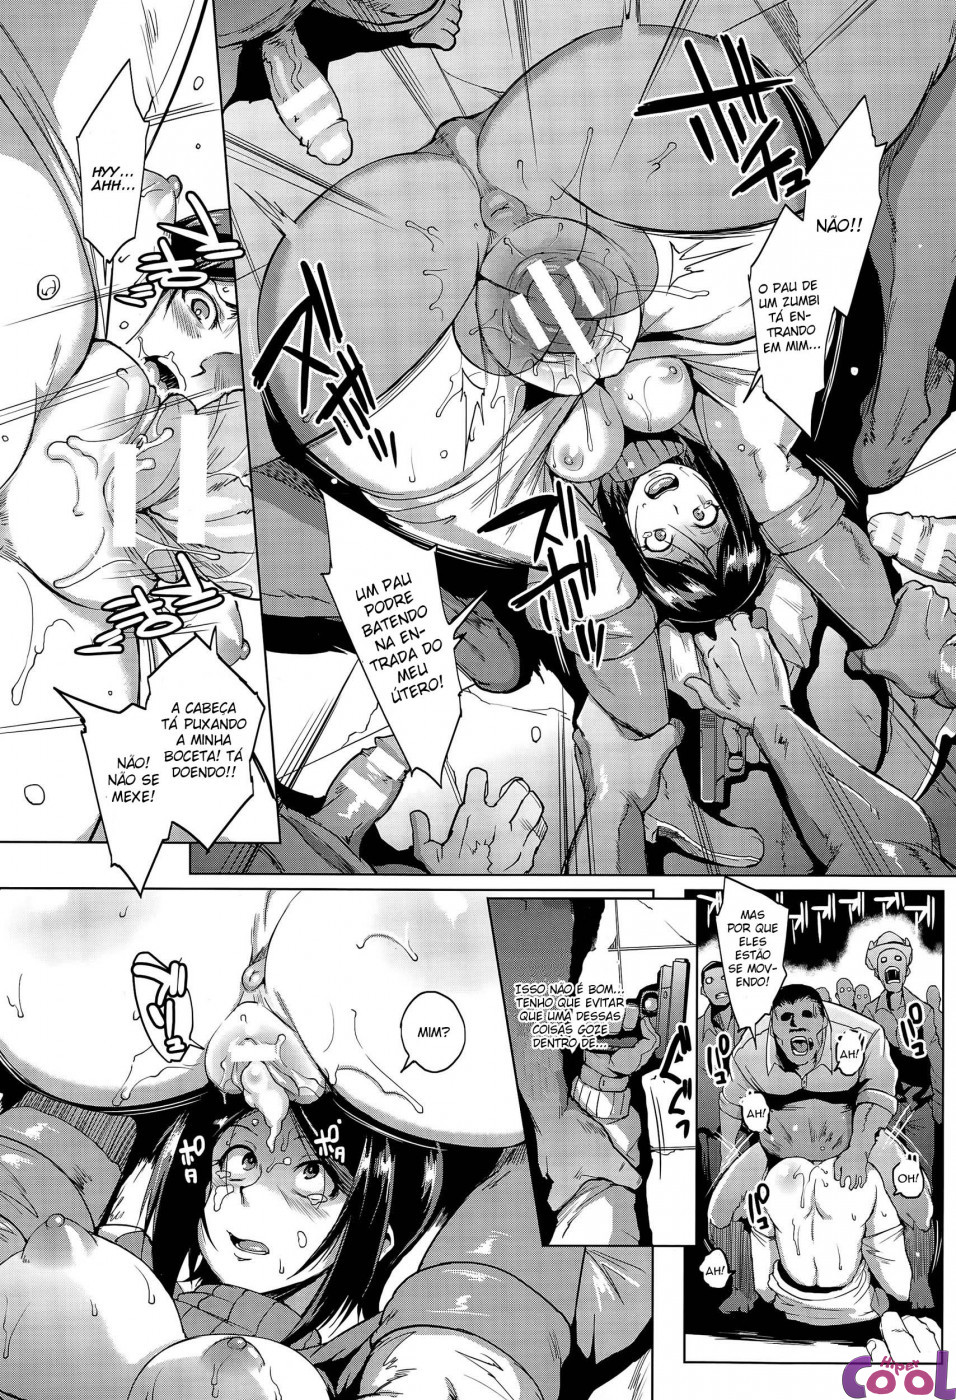 voodoo-squad-chuuhen-chapter-01-page-15.jpg